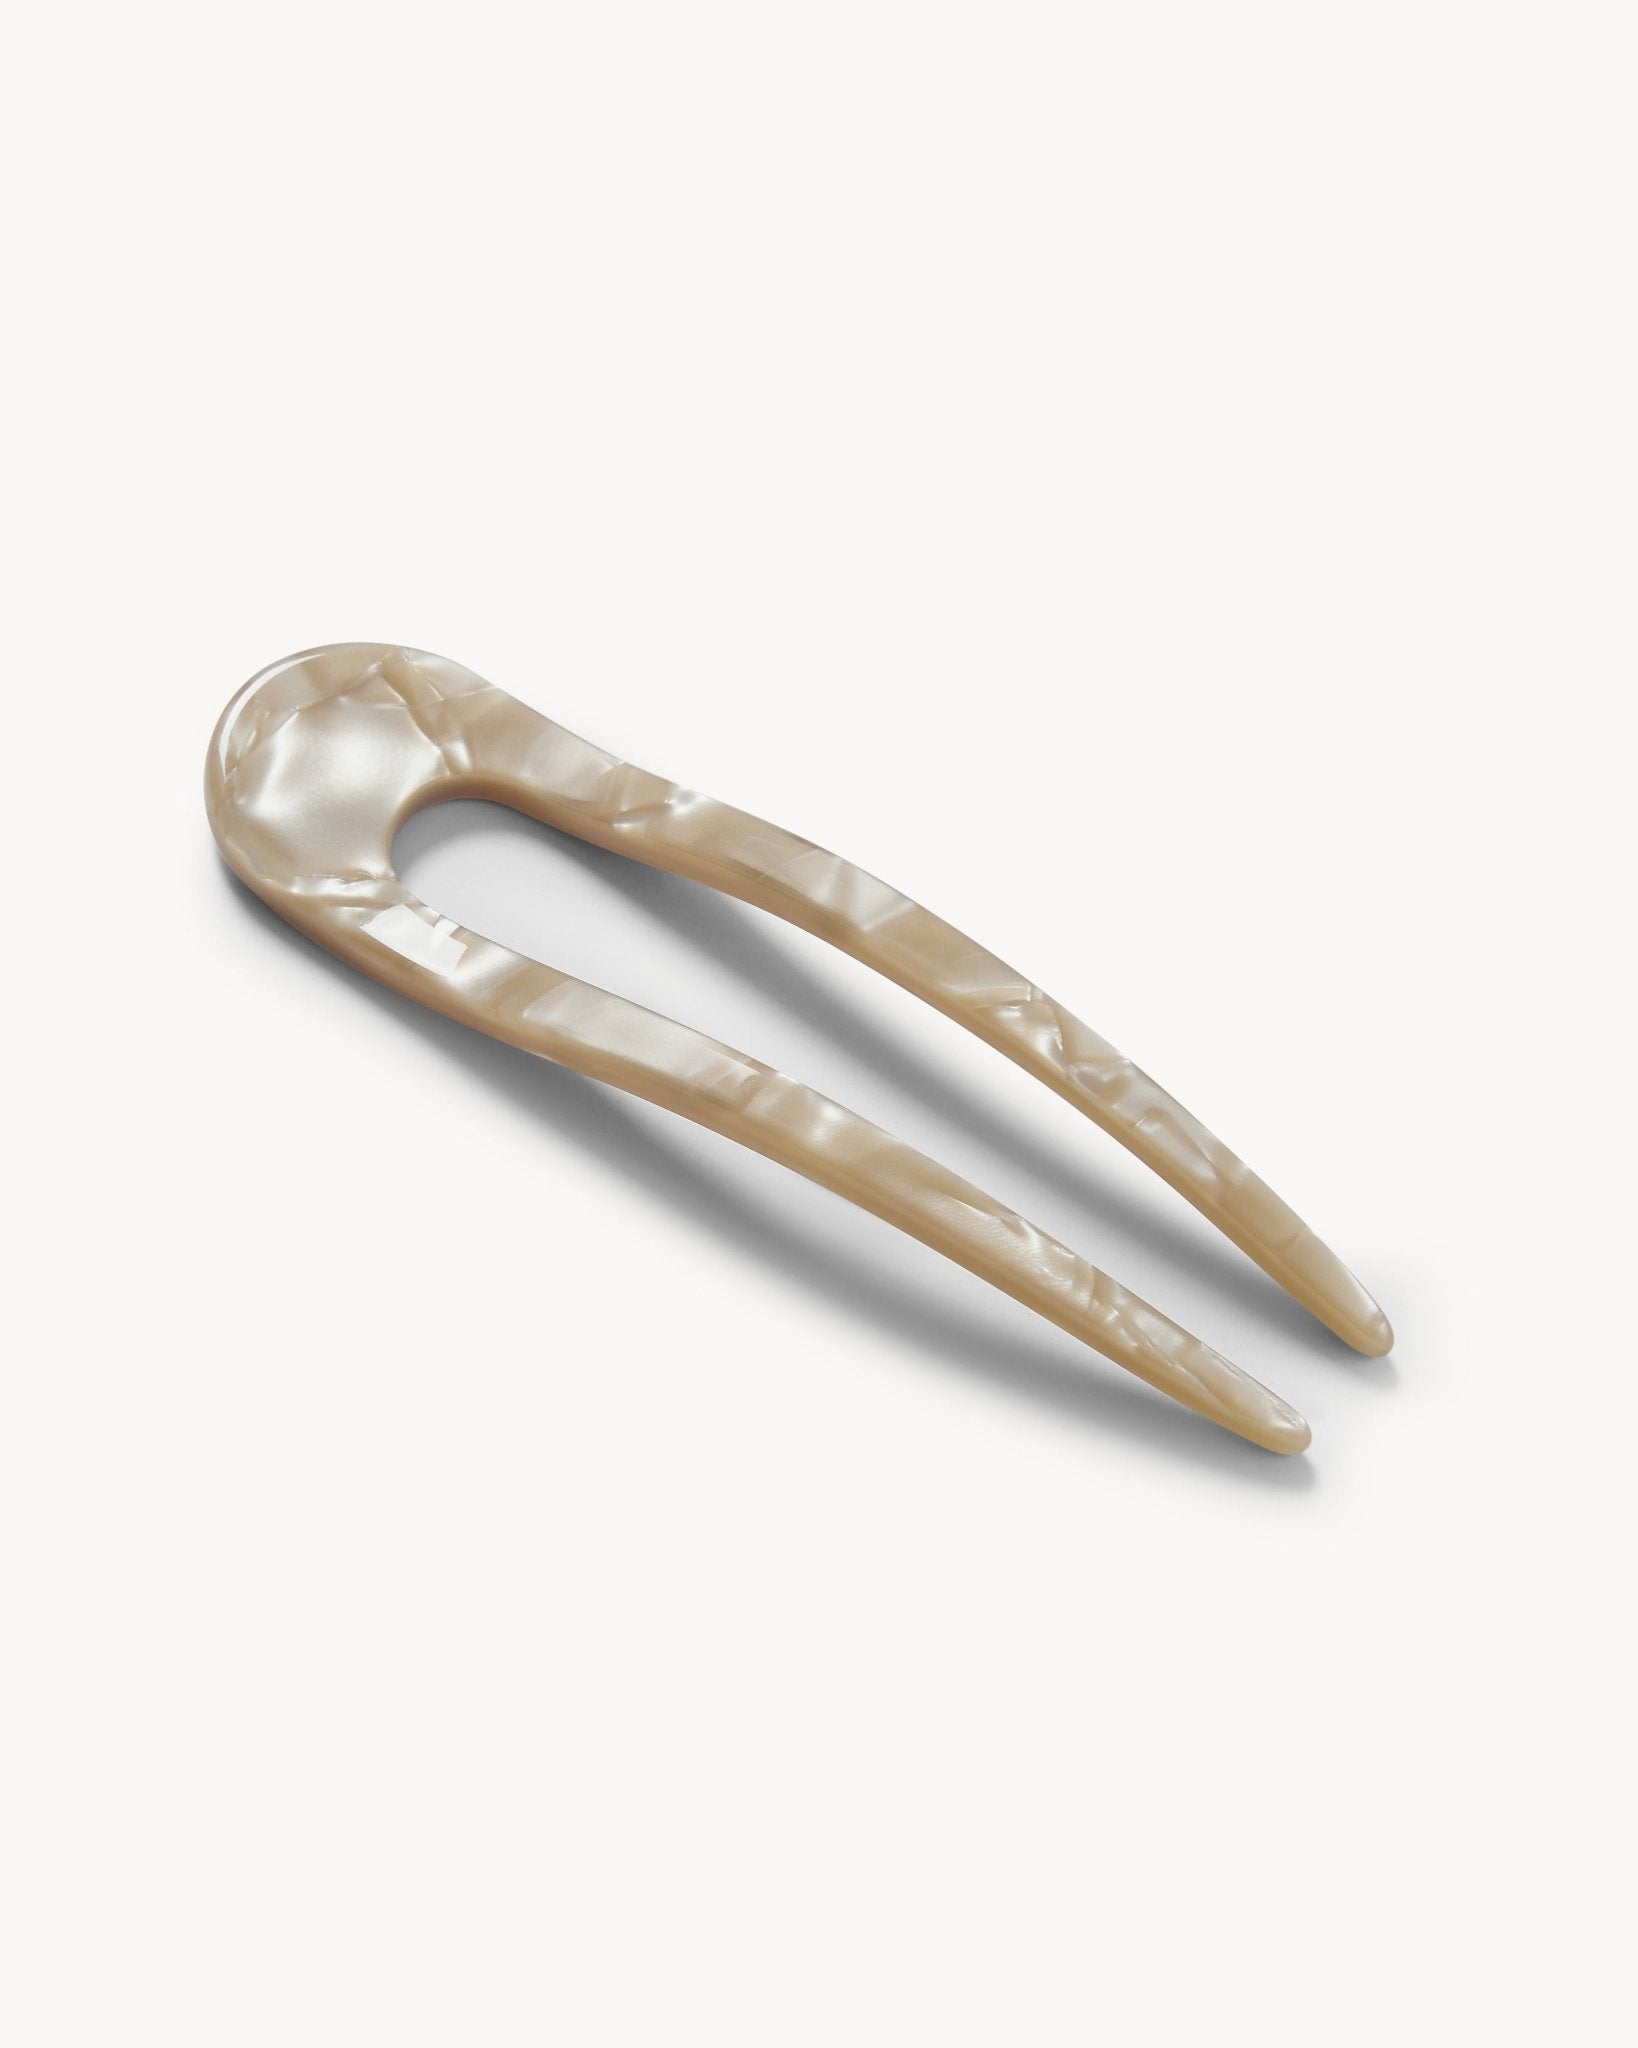 French Hair Pin in Sand Shell - MACHETE